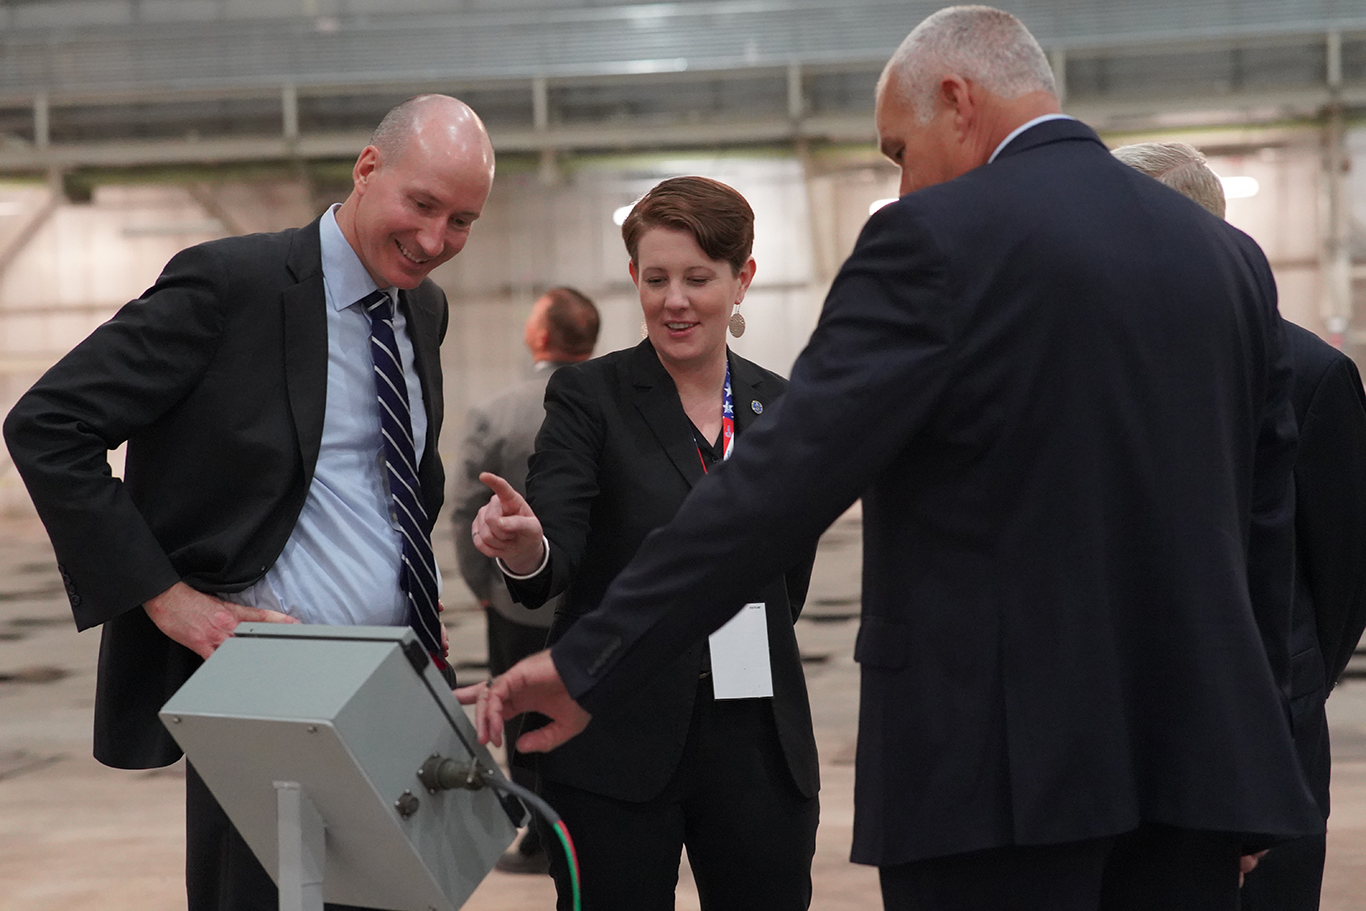 David Turk, left, deputy secretary for the U.S. Department of Energy; and Kathryn Huff, center, assistant sectary for DOE’s Office of Nuclear Energy, with Centrus executives inside the company’s new uranium enrichment plant in Piketon, Ohio.